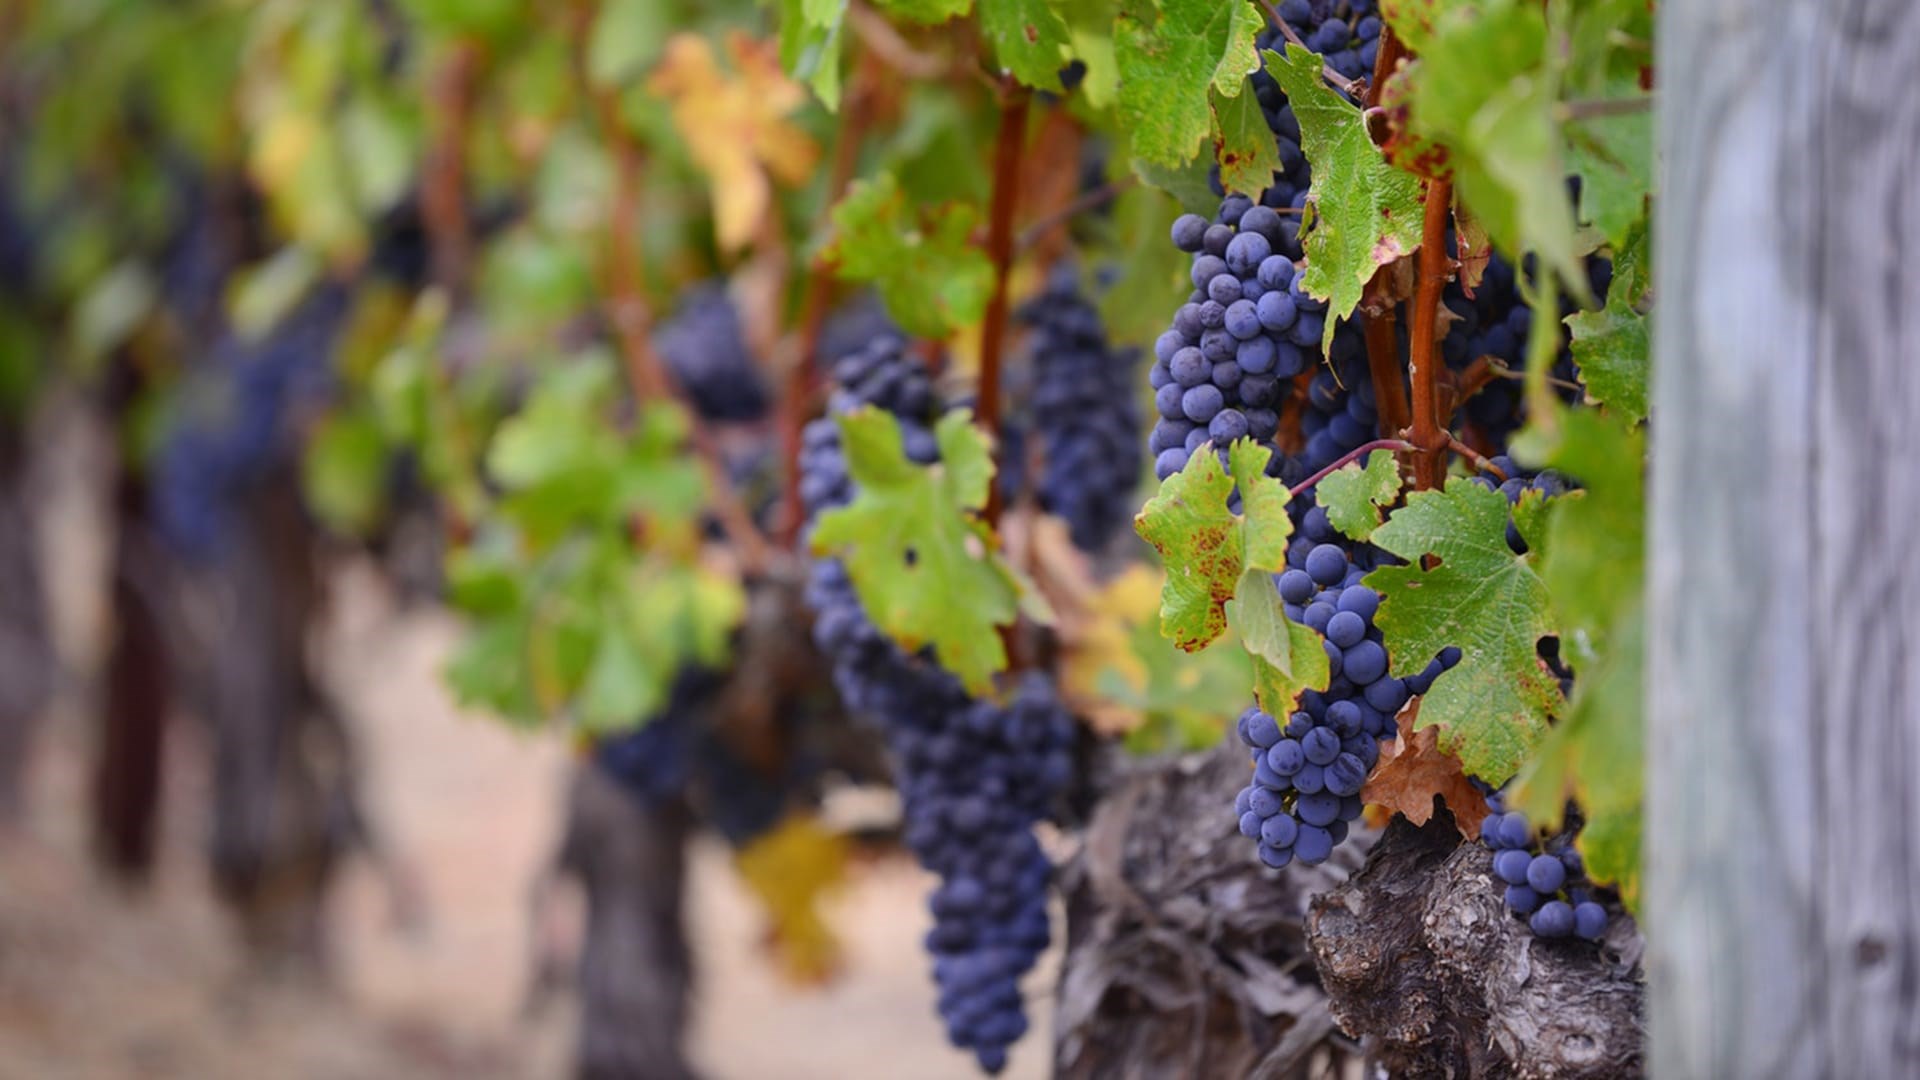 Vitis Vinifera is the most common specie in wine production